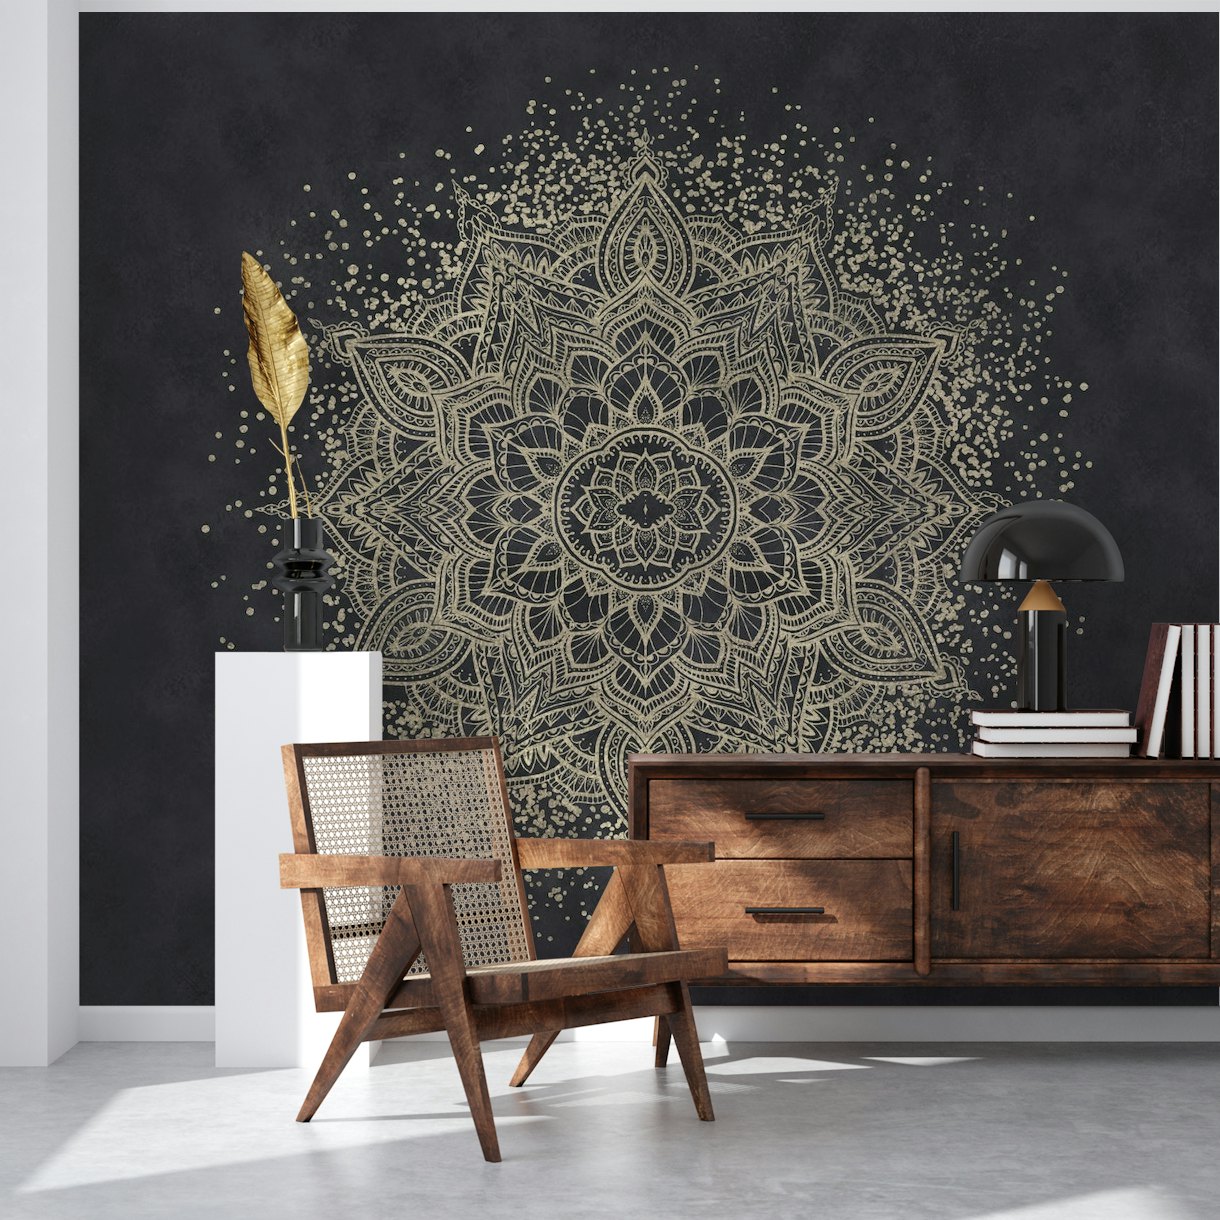 Exquisite golden sparkling mandala wallpaper for transforming your space